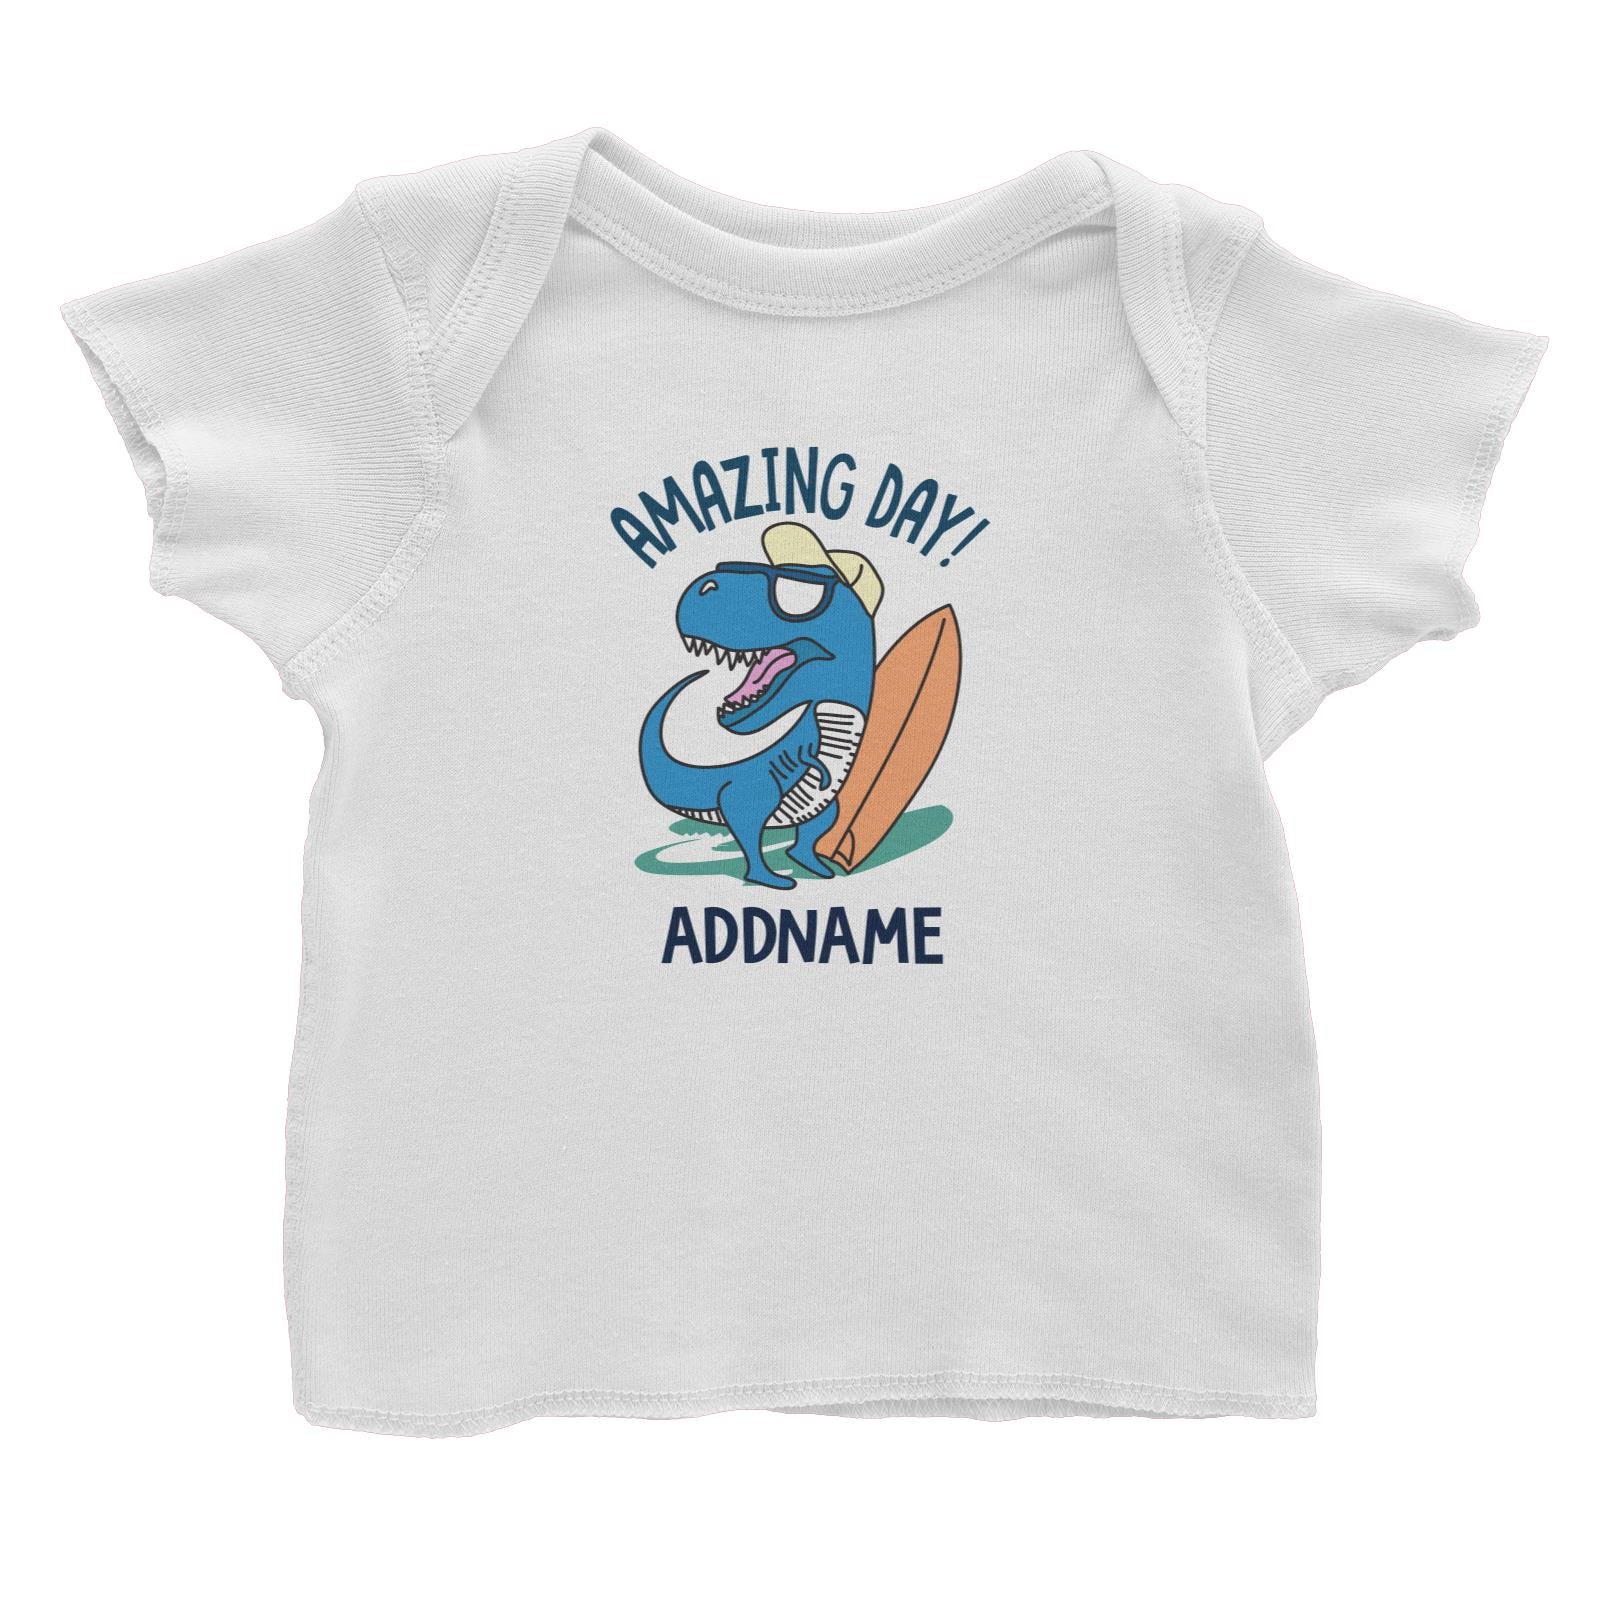 Cool Vibrant Series Amazing Day Dinosaur Surfer Addname Baby T-Shirt